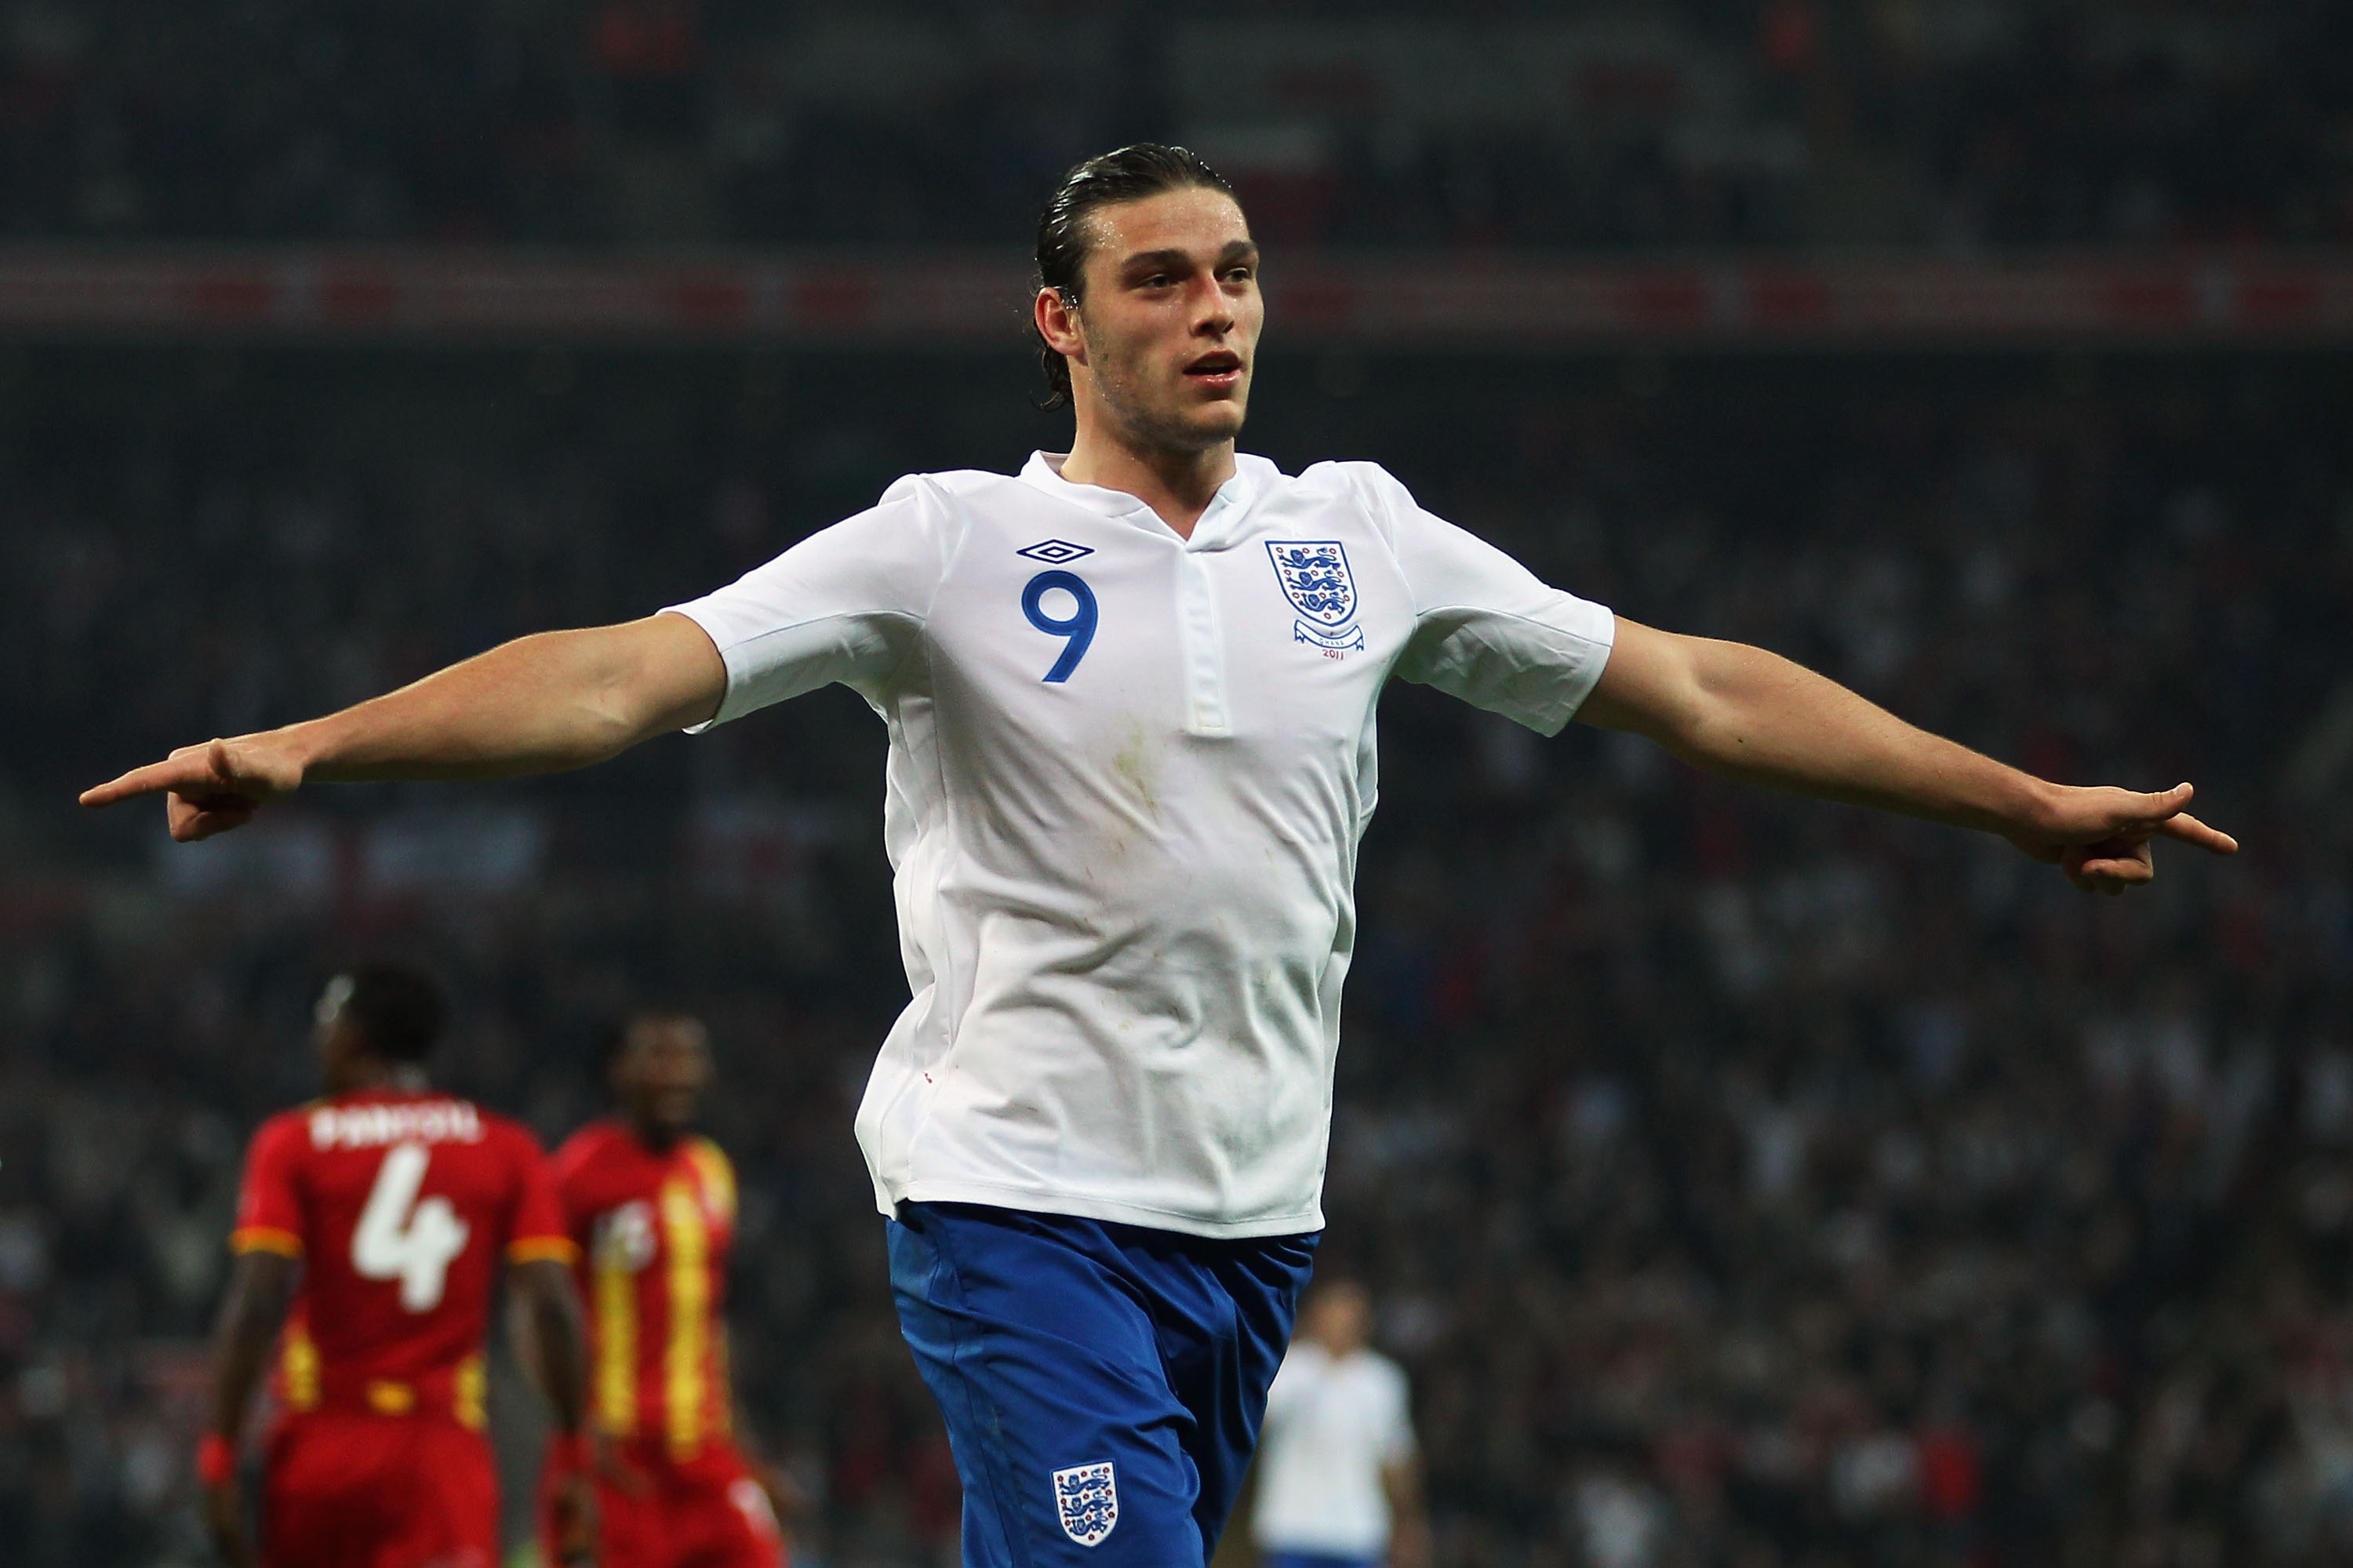 LONDON, ENGLAND - MARCH 29:  Andy Carroll of England celebrates as he scores their first goal during the international friendly match between England and Ghana at Wembley Stadium on March 29, 2011 in London, England.  (Photo by Julian Finney/Getty Images)